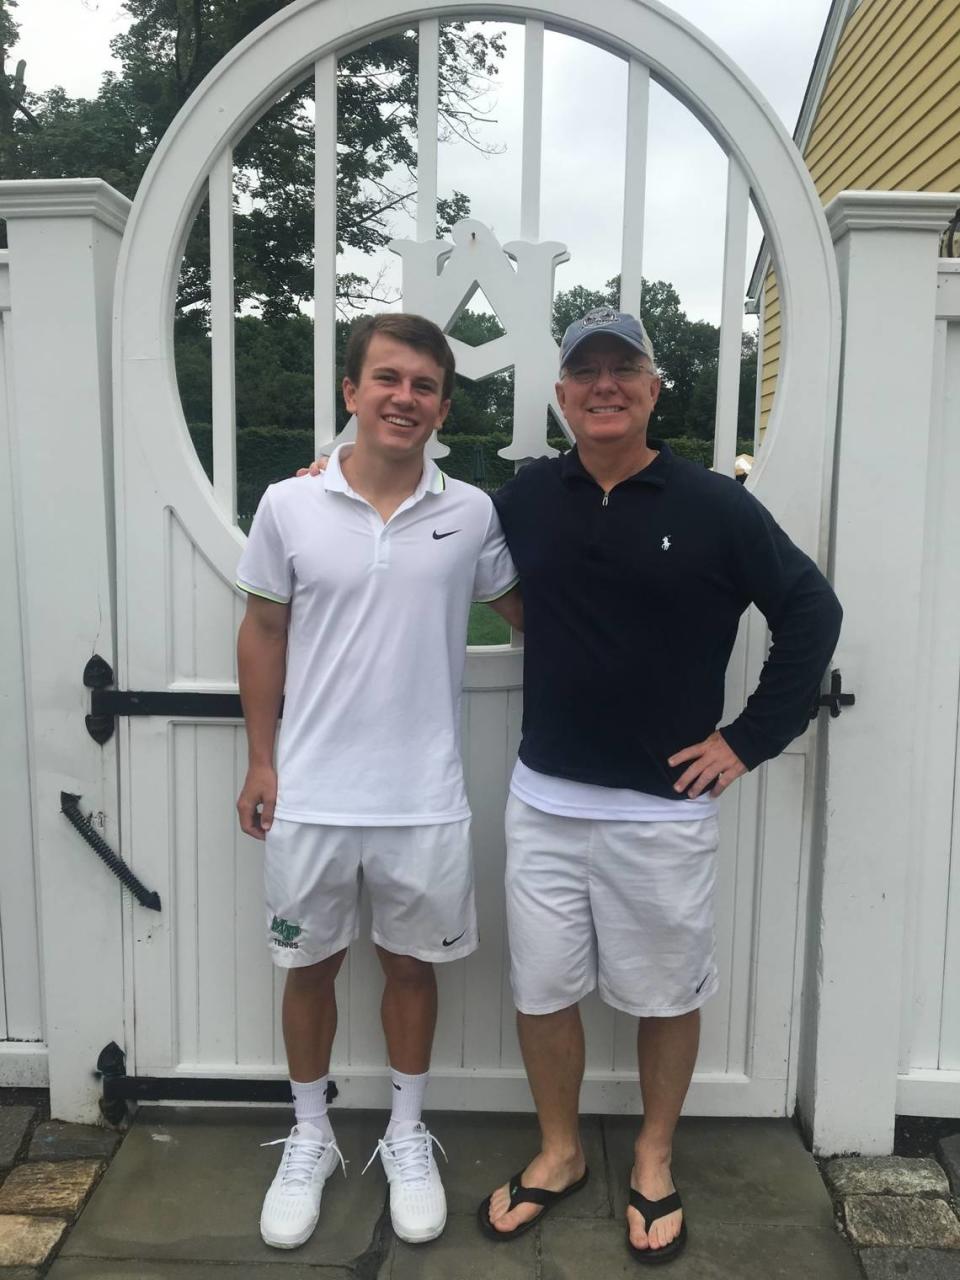 Chuck Reiney (right) and his son Charlie were both accomplished amateur tennis players who occasionally played in national father-son tennis tournaments together.